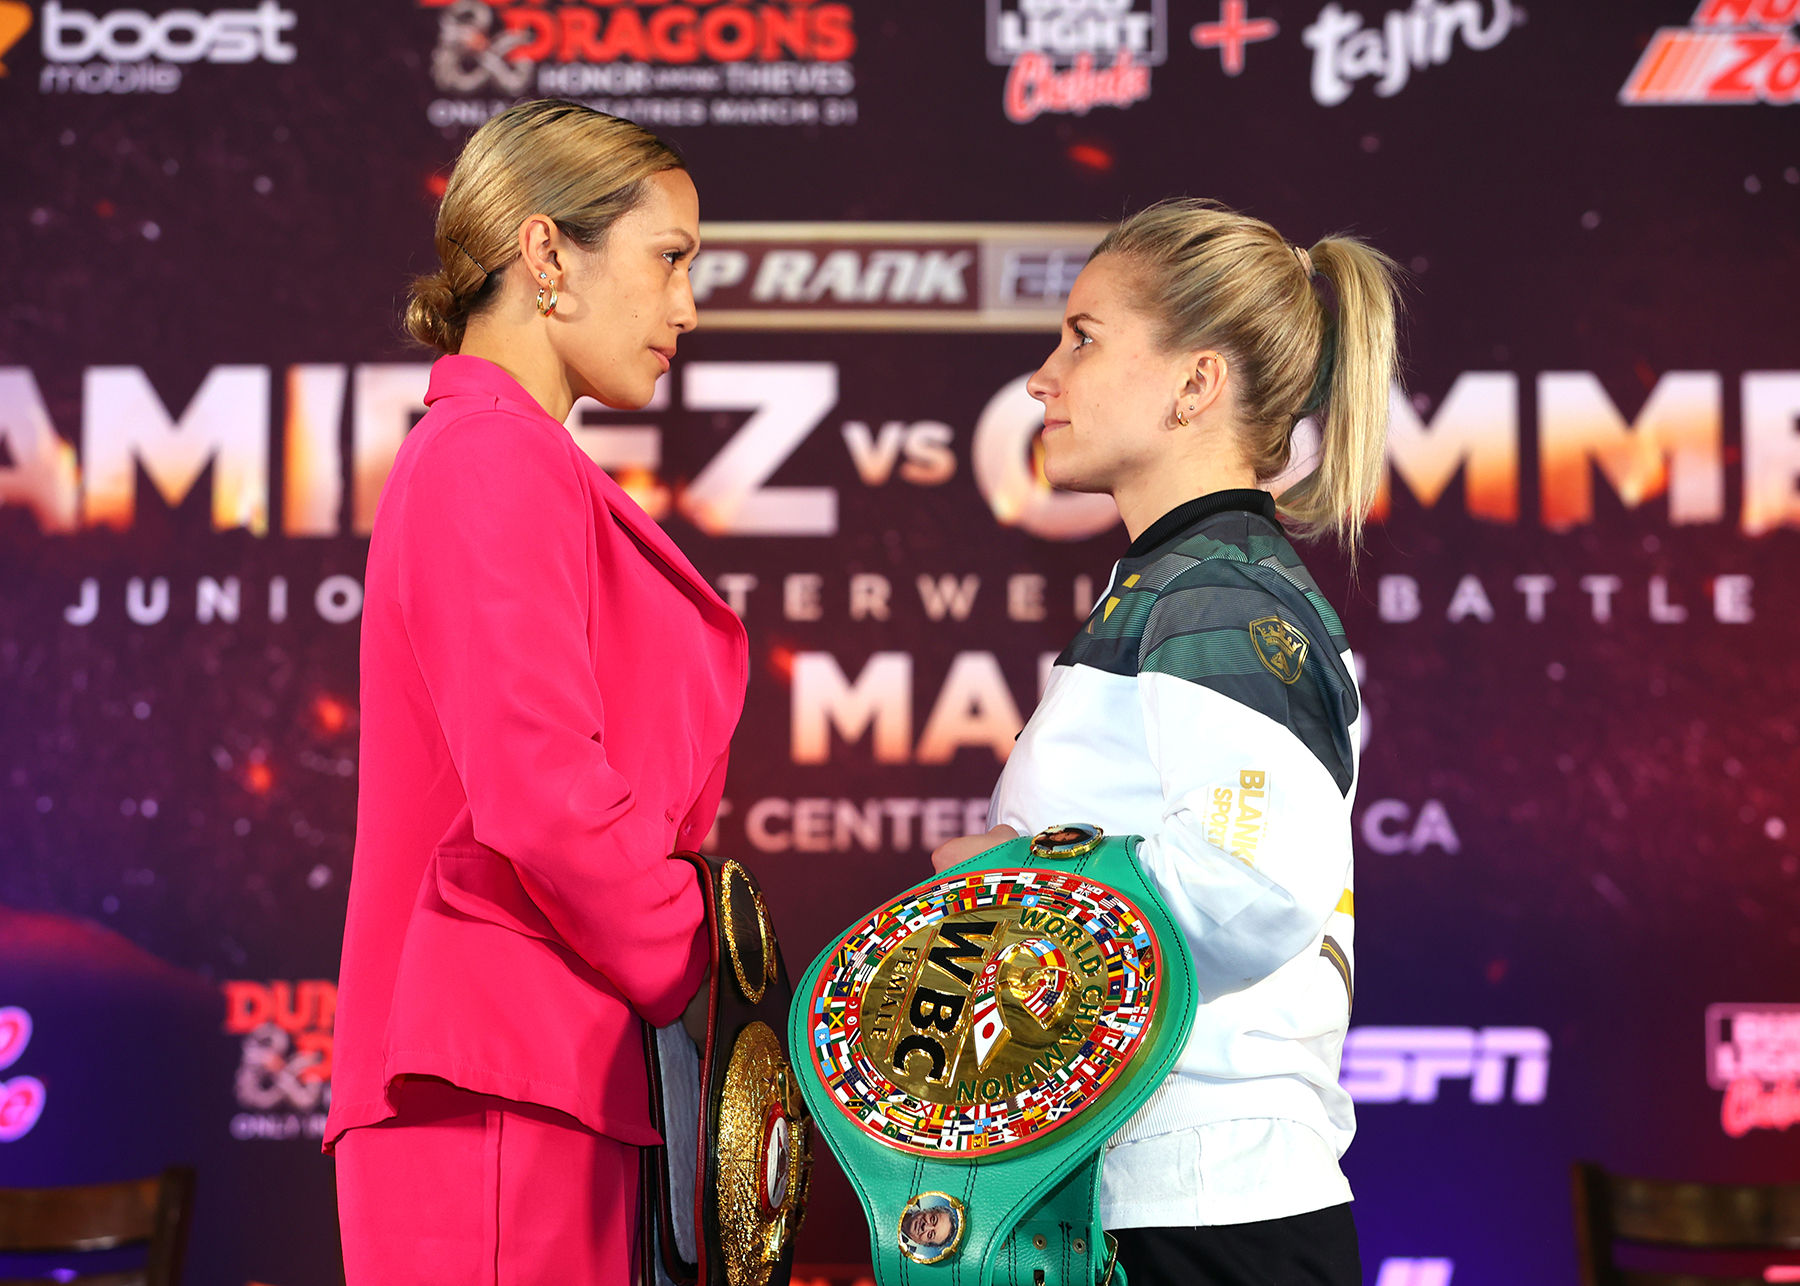 Tina Rupprecht travels to the US hoping to upset Seniesa Estrada’s plans in Ring title bout